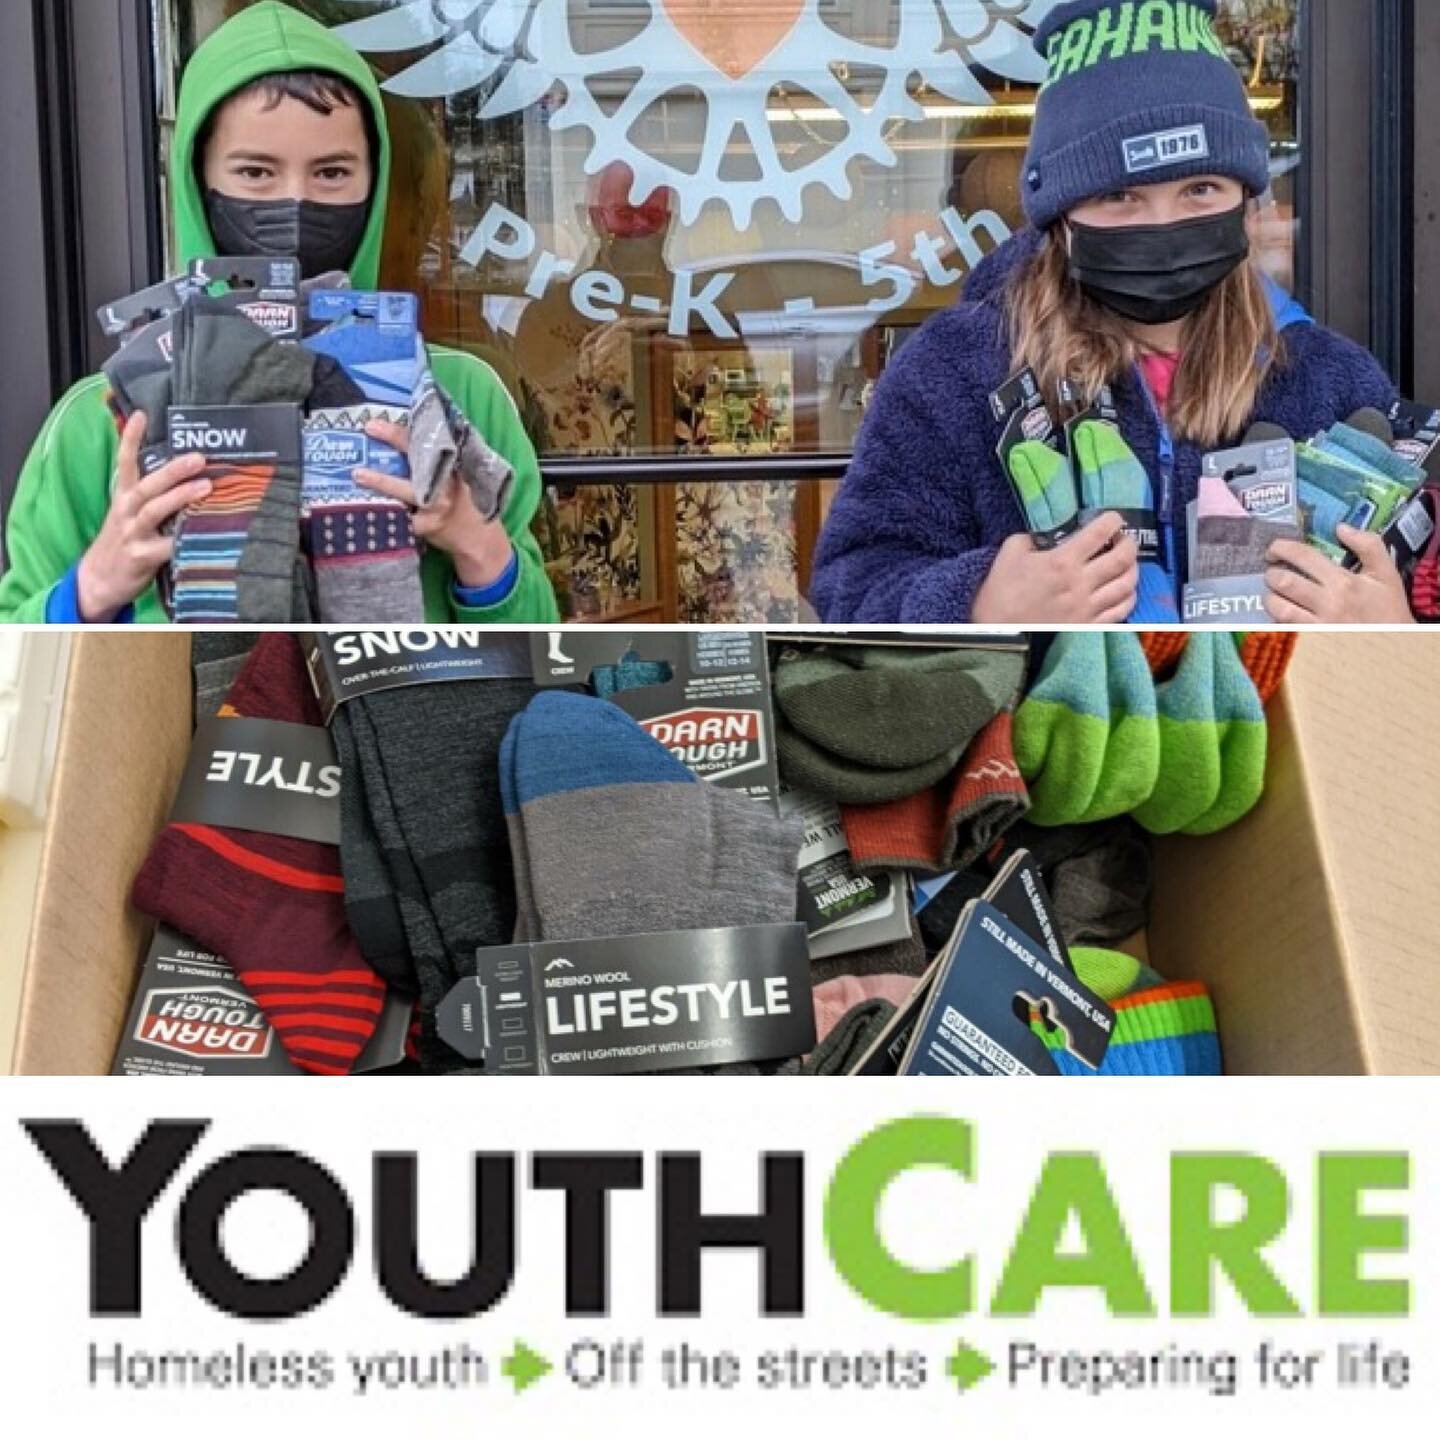 @youthcaresea needs socks. Glad we can help a bit. Warmth for all in need. #homelessyouth #homelessyouthawareness